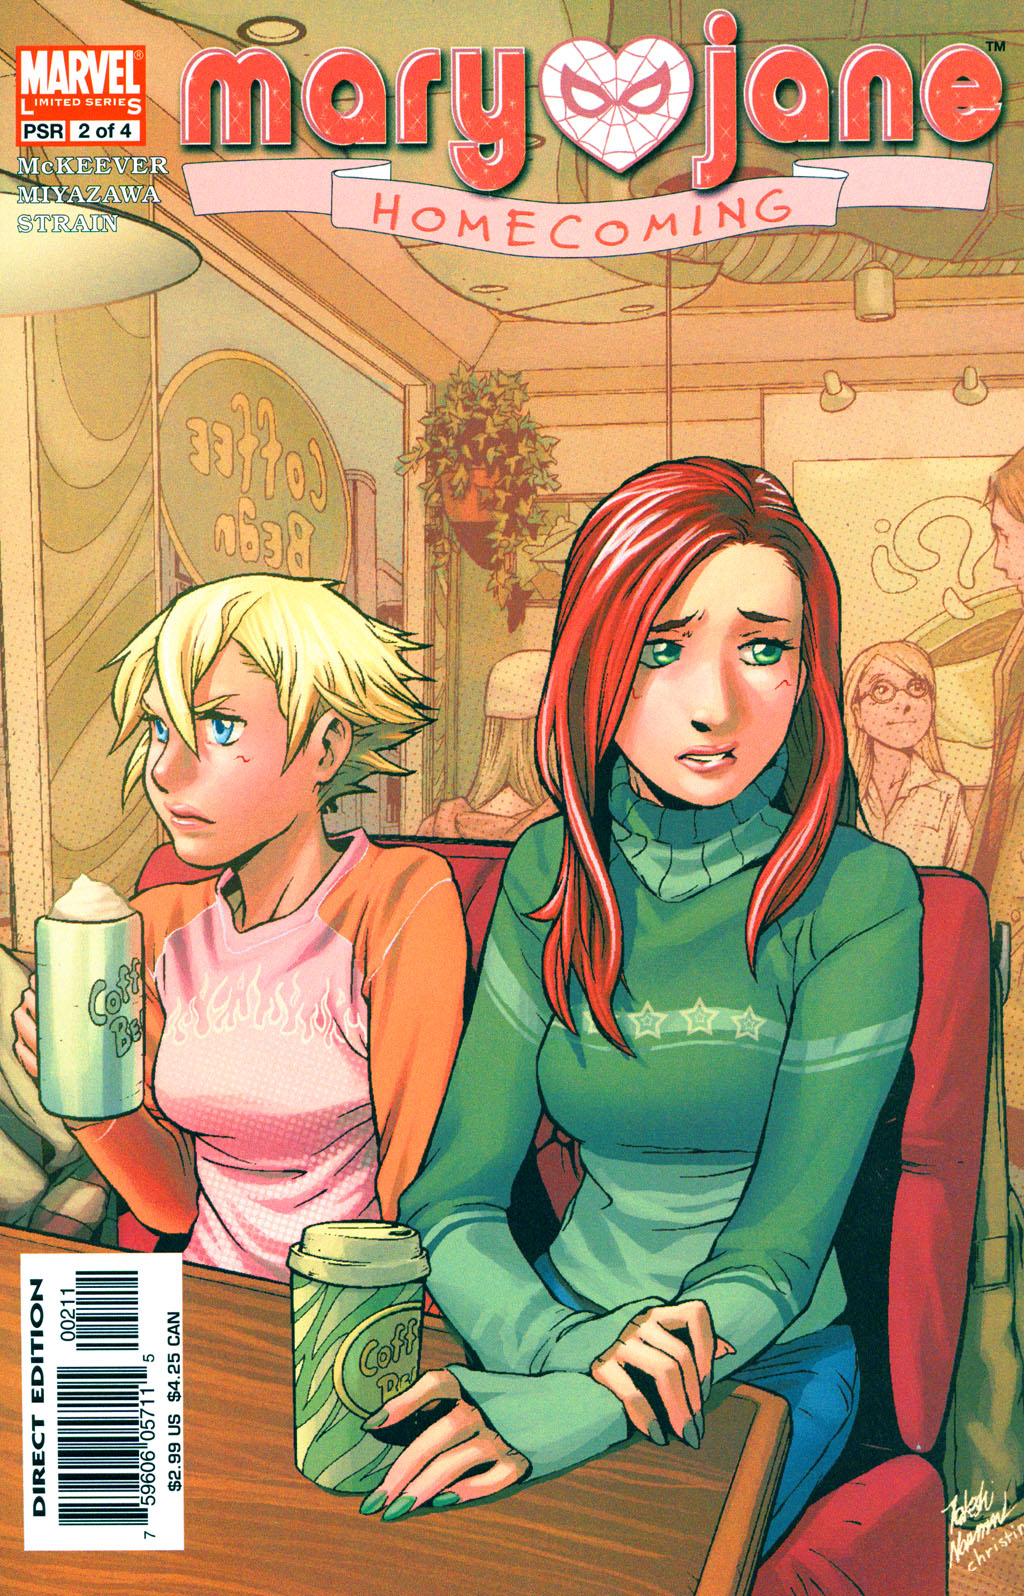 Read online Mary Jane: Homecoming comic -  Issue #2 - 1